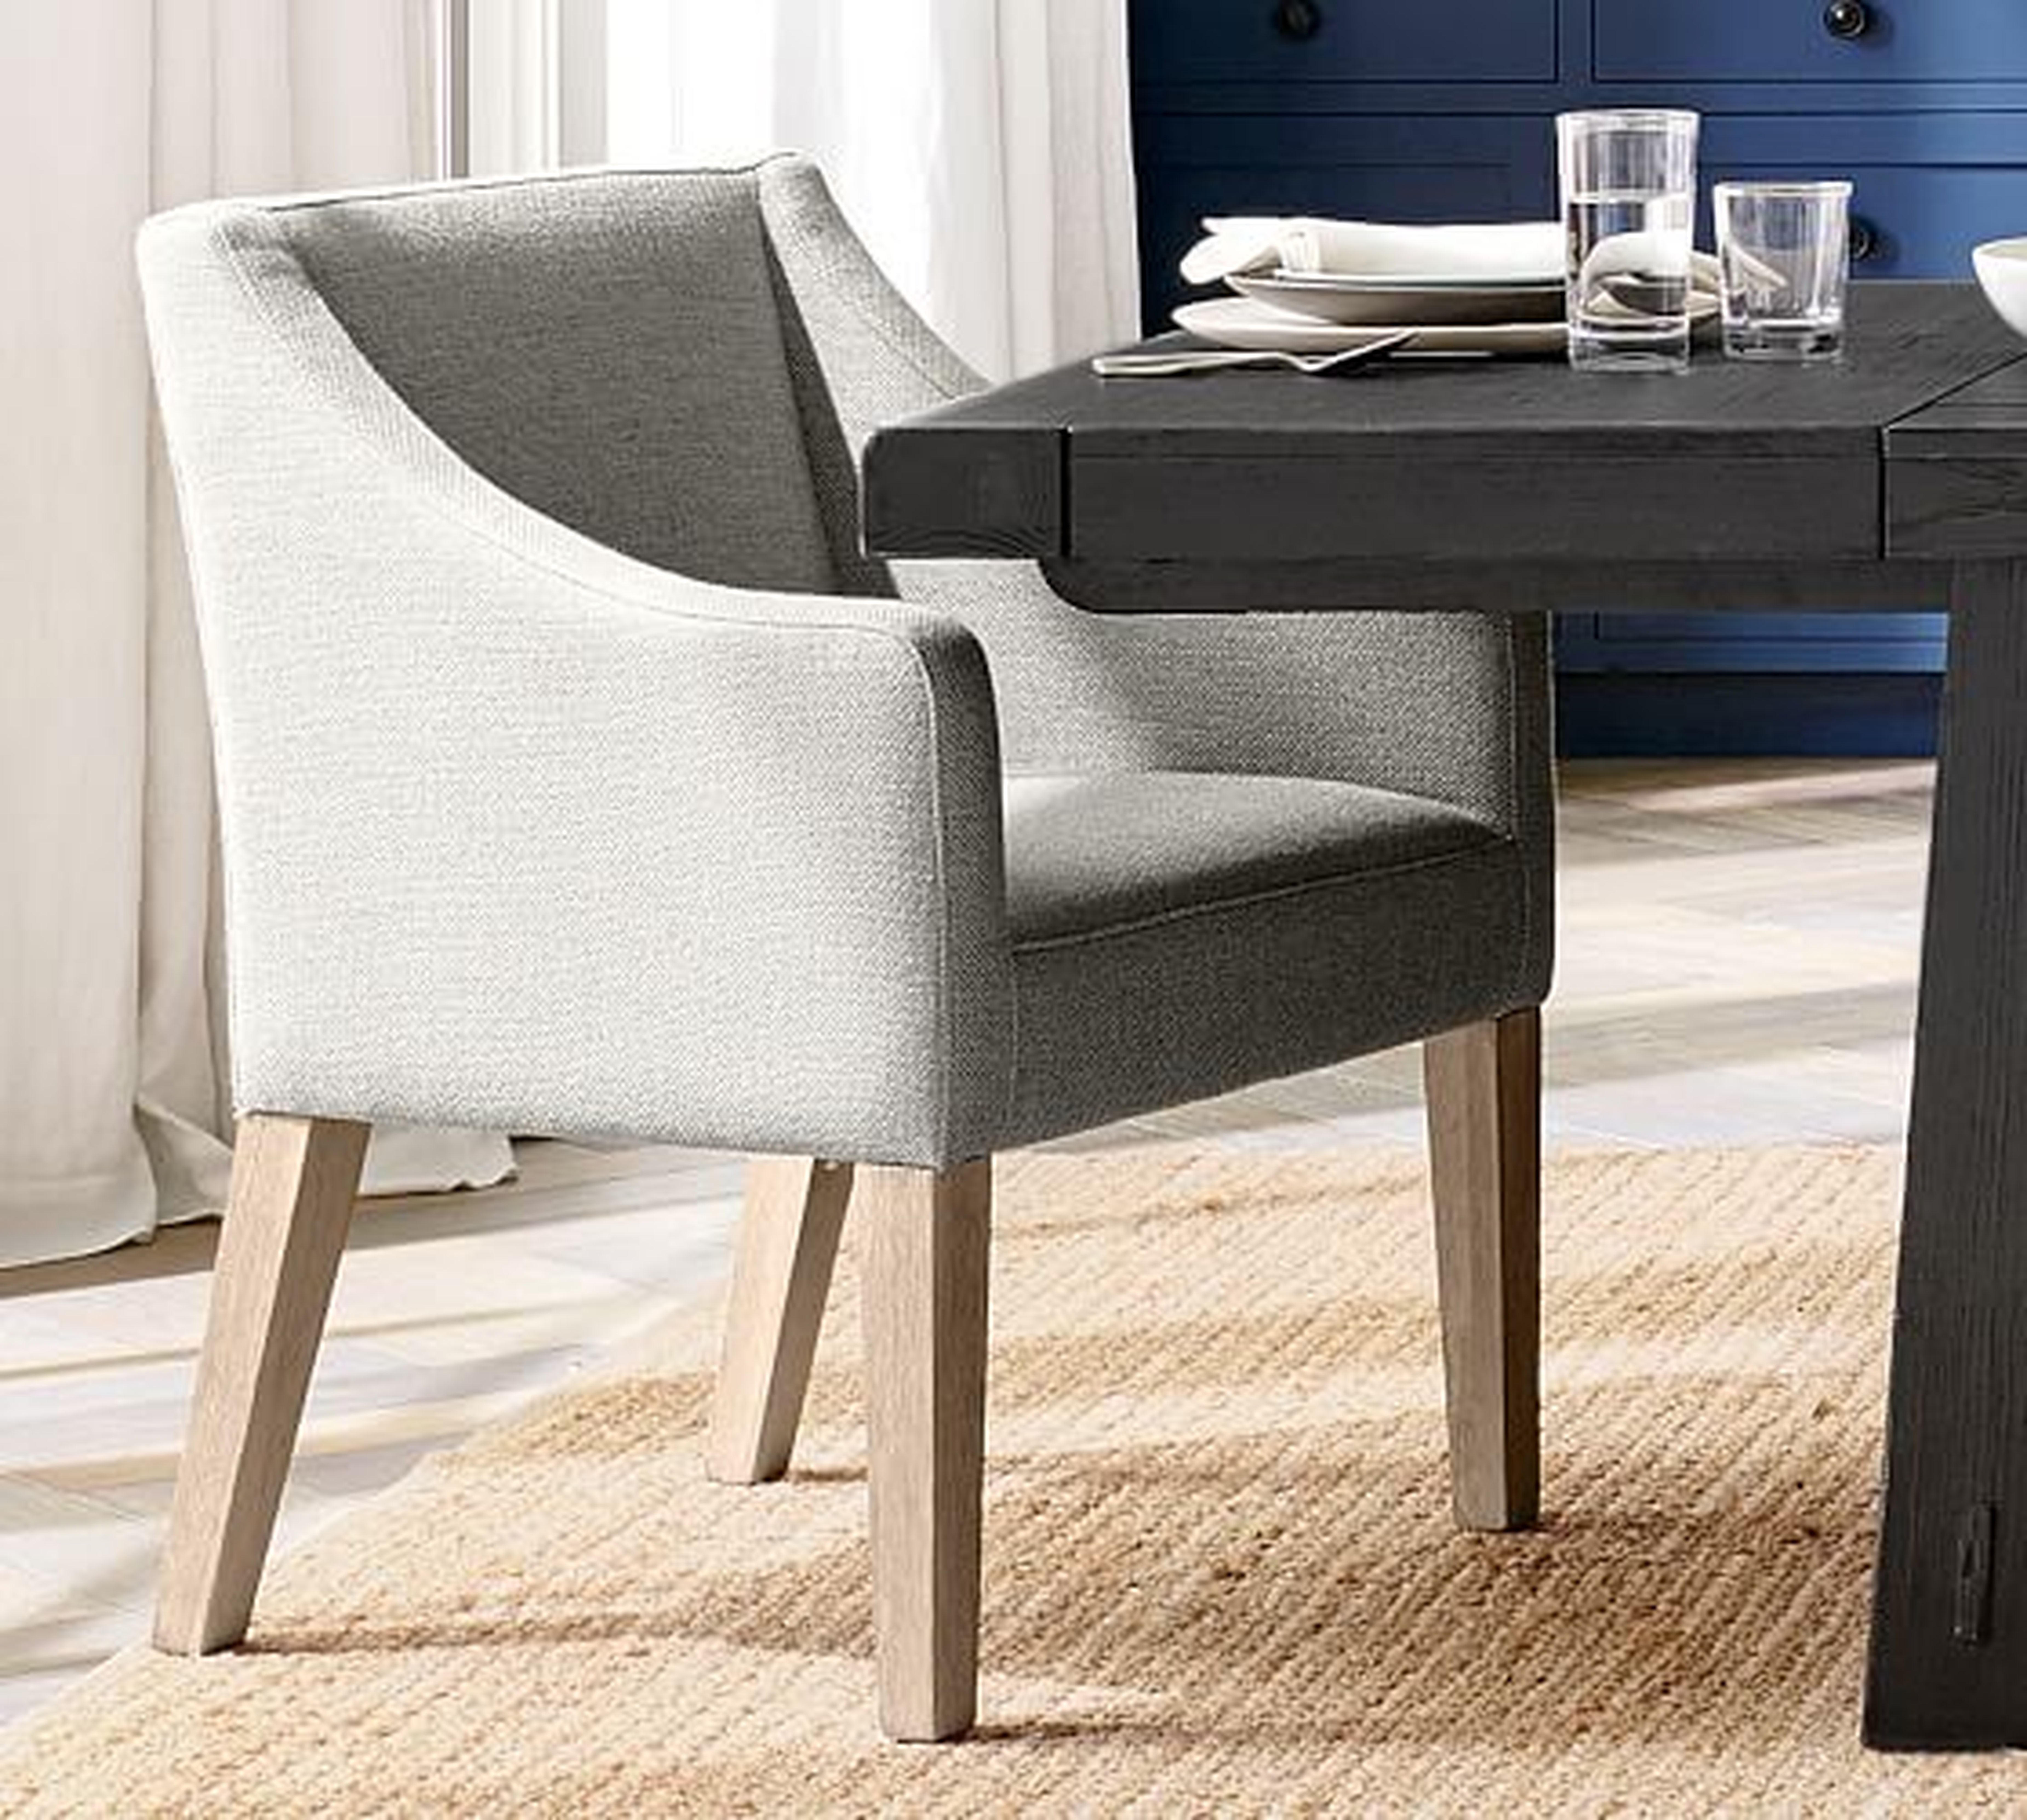 PB Classic Upholstered Slope Arm Dining Chair with Seadrift Legs, Performance Heathered Tweed Pebble - Pottery Barn